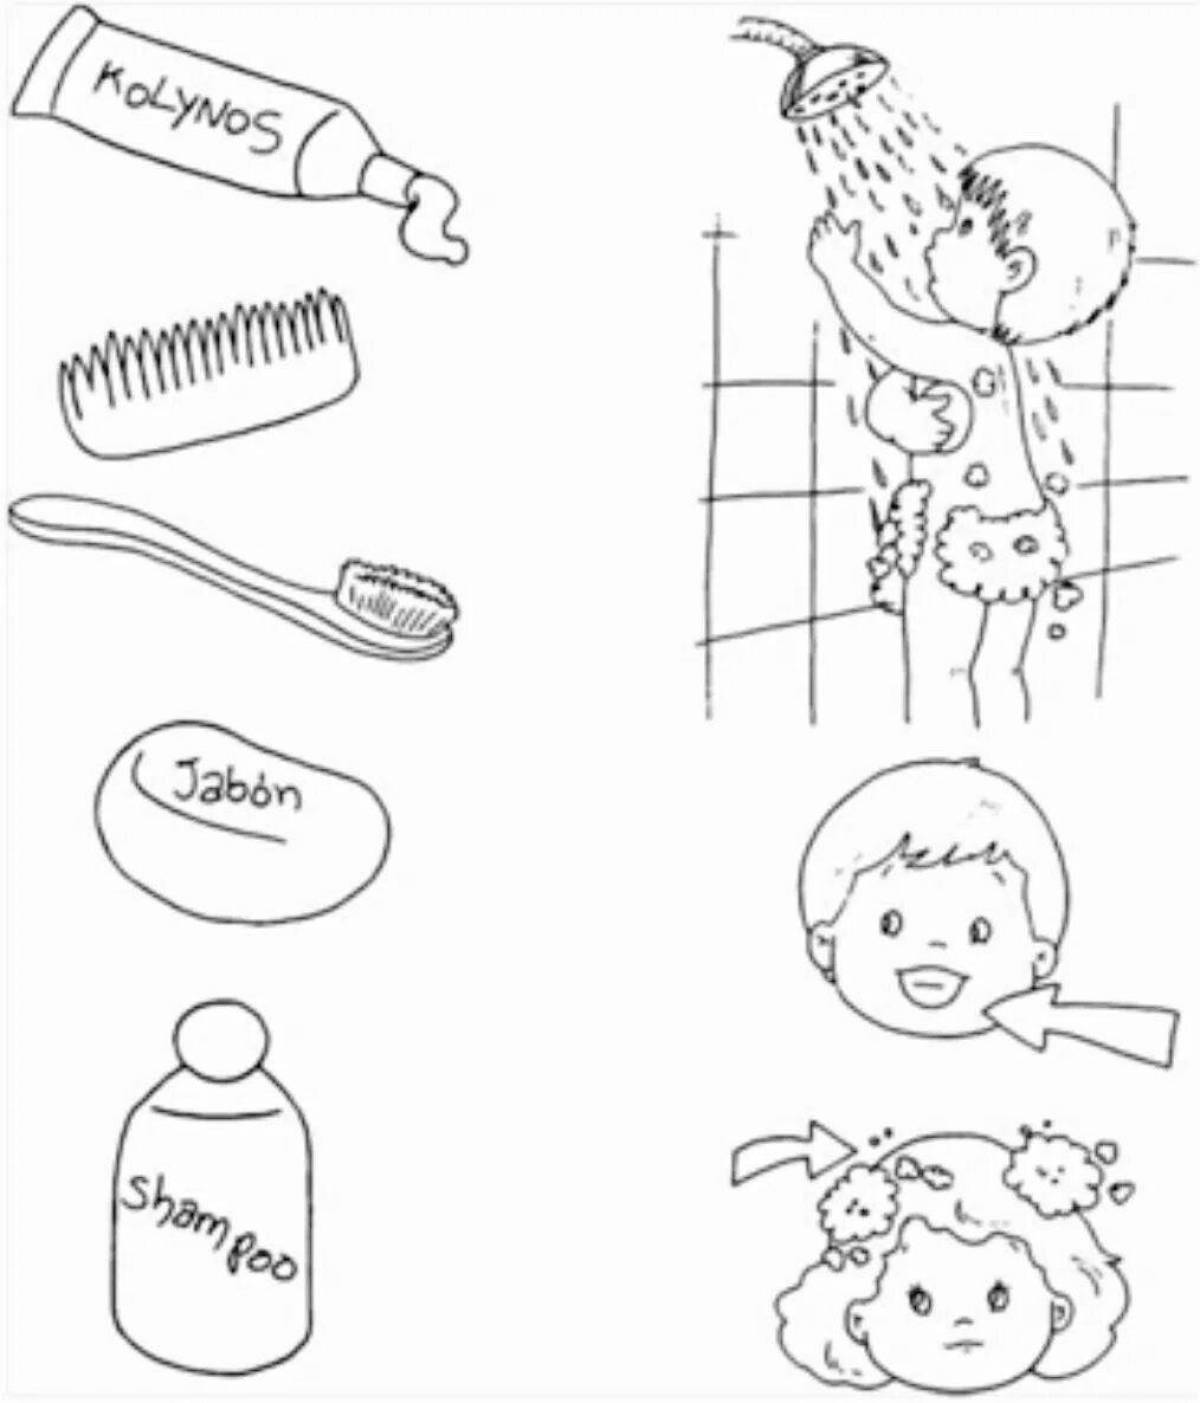 Colorful dazzling hygiene items coloring book